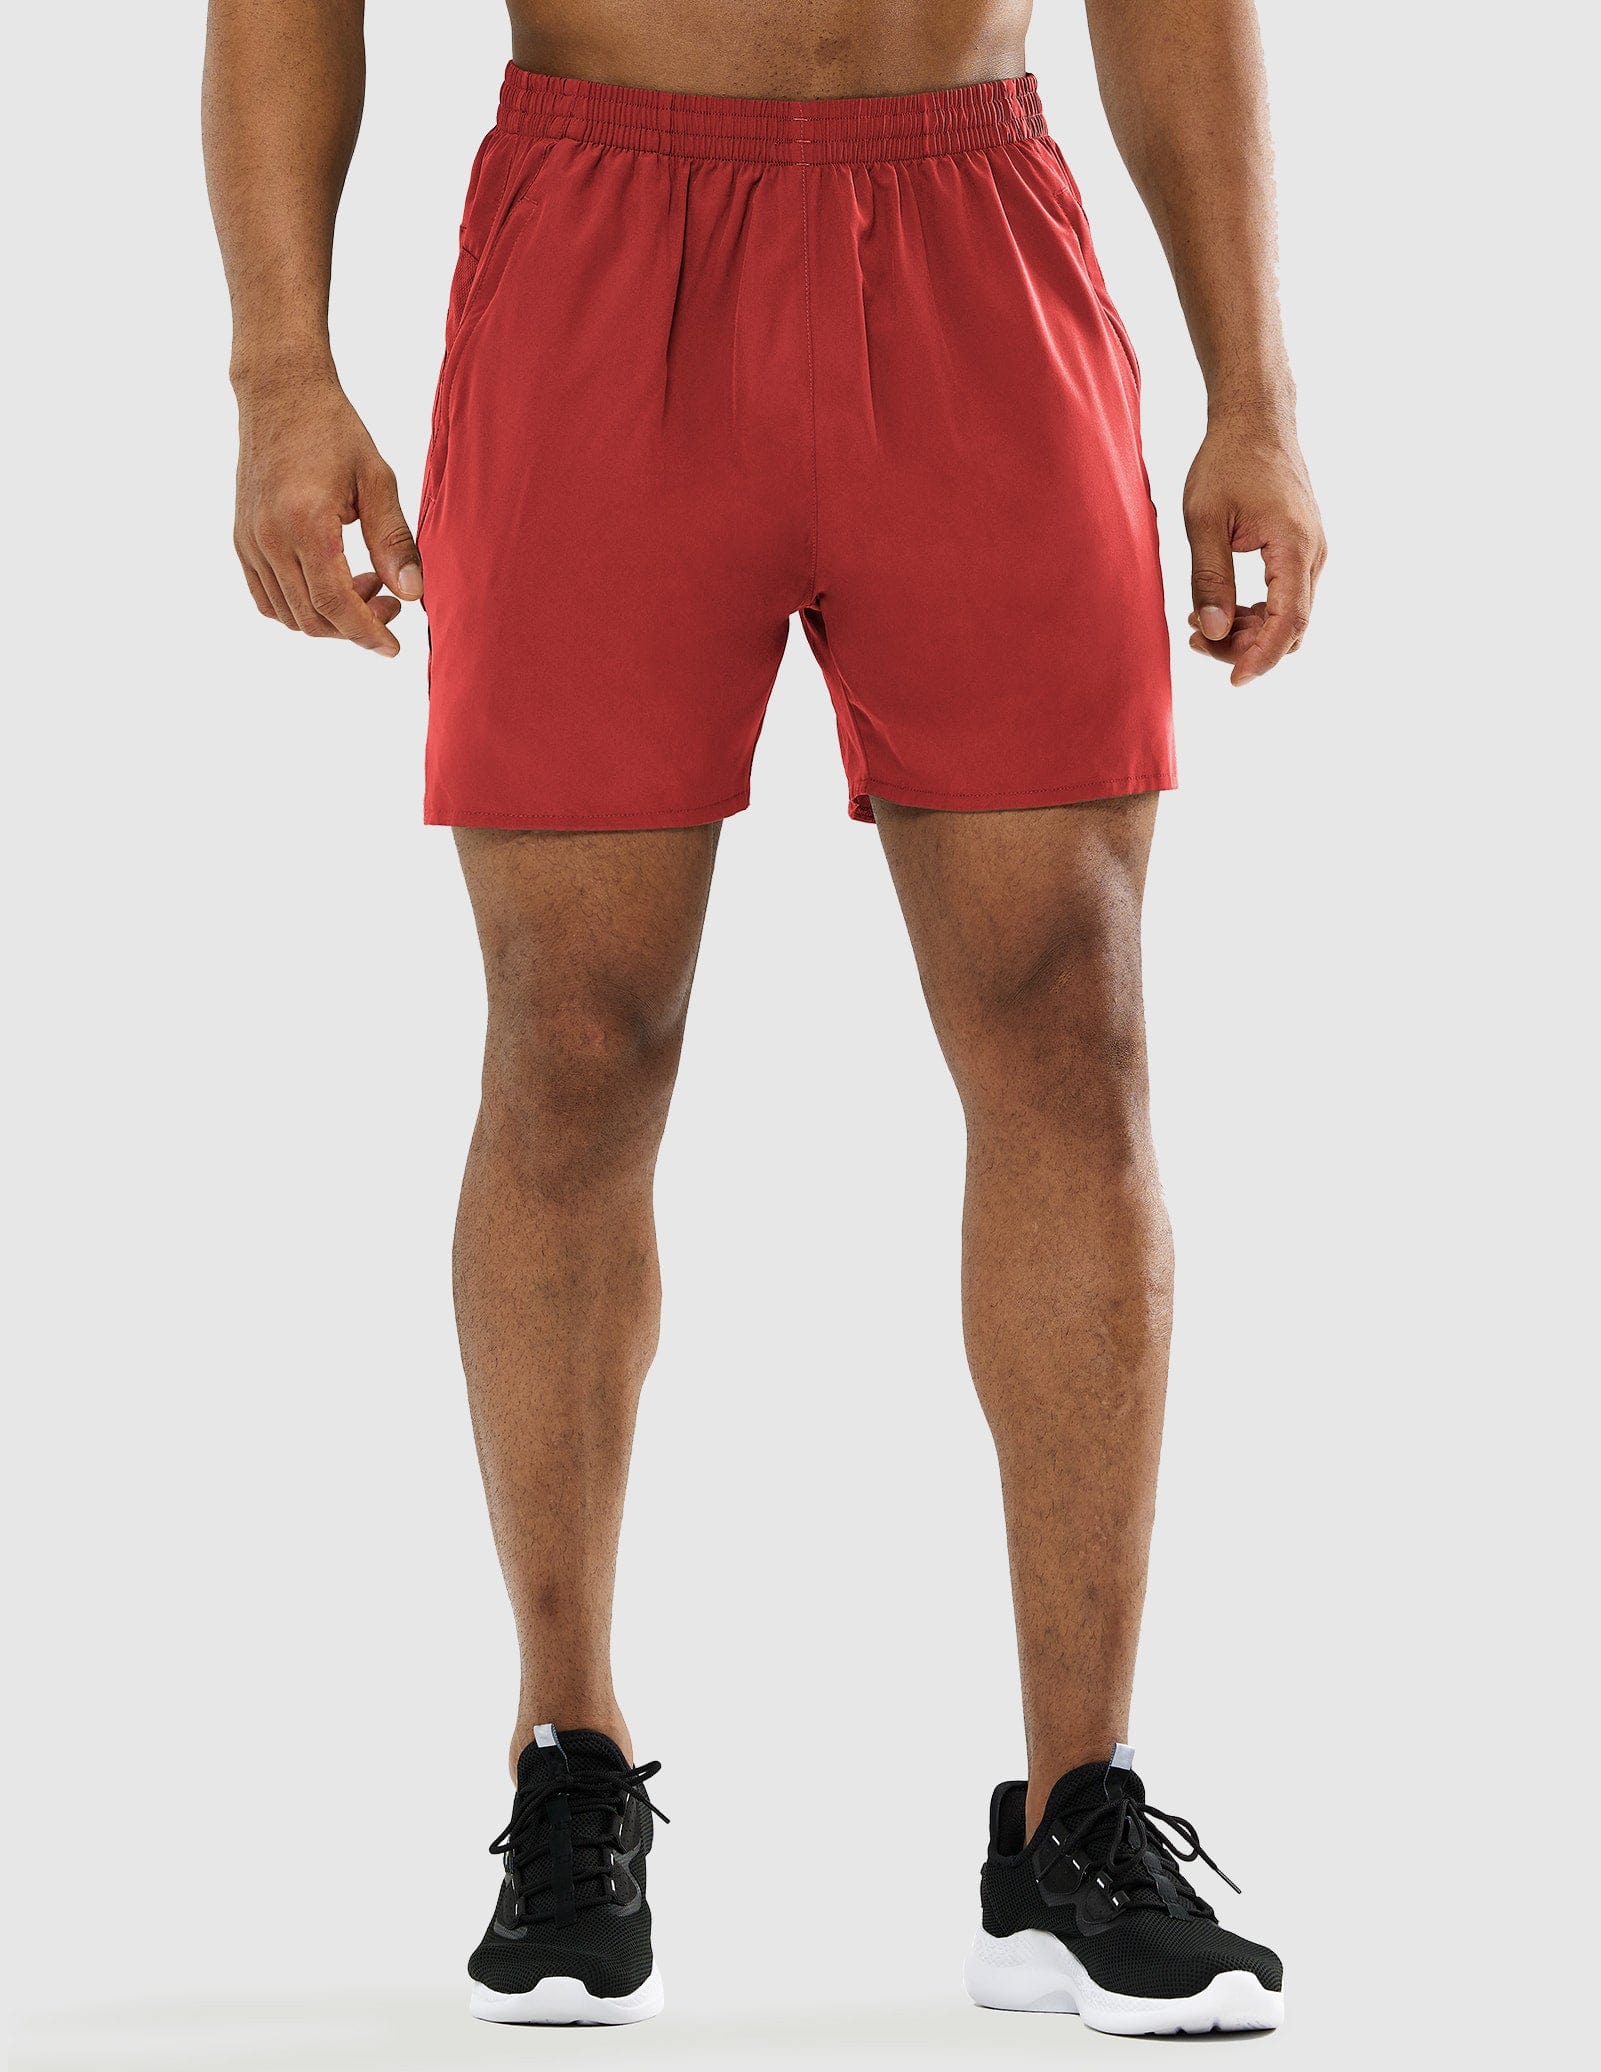 Men's Workout 5 Inches Running Shorts with Zipper Pockets Men's Shorts MIER